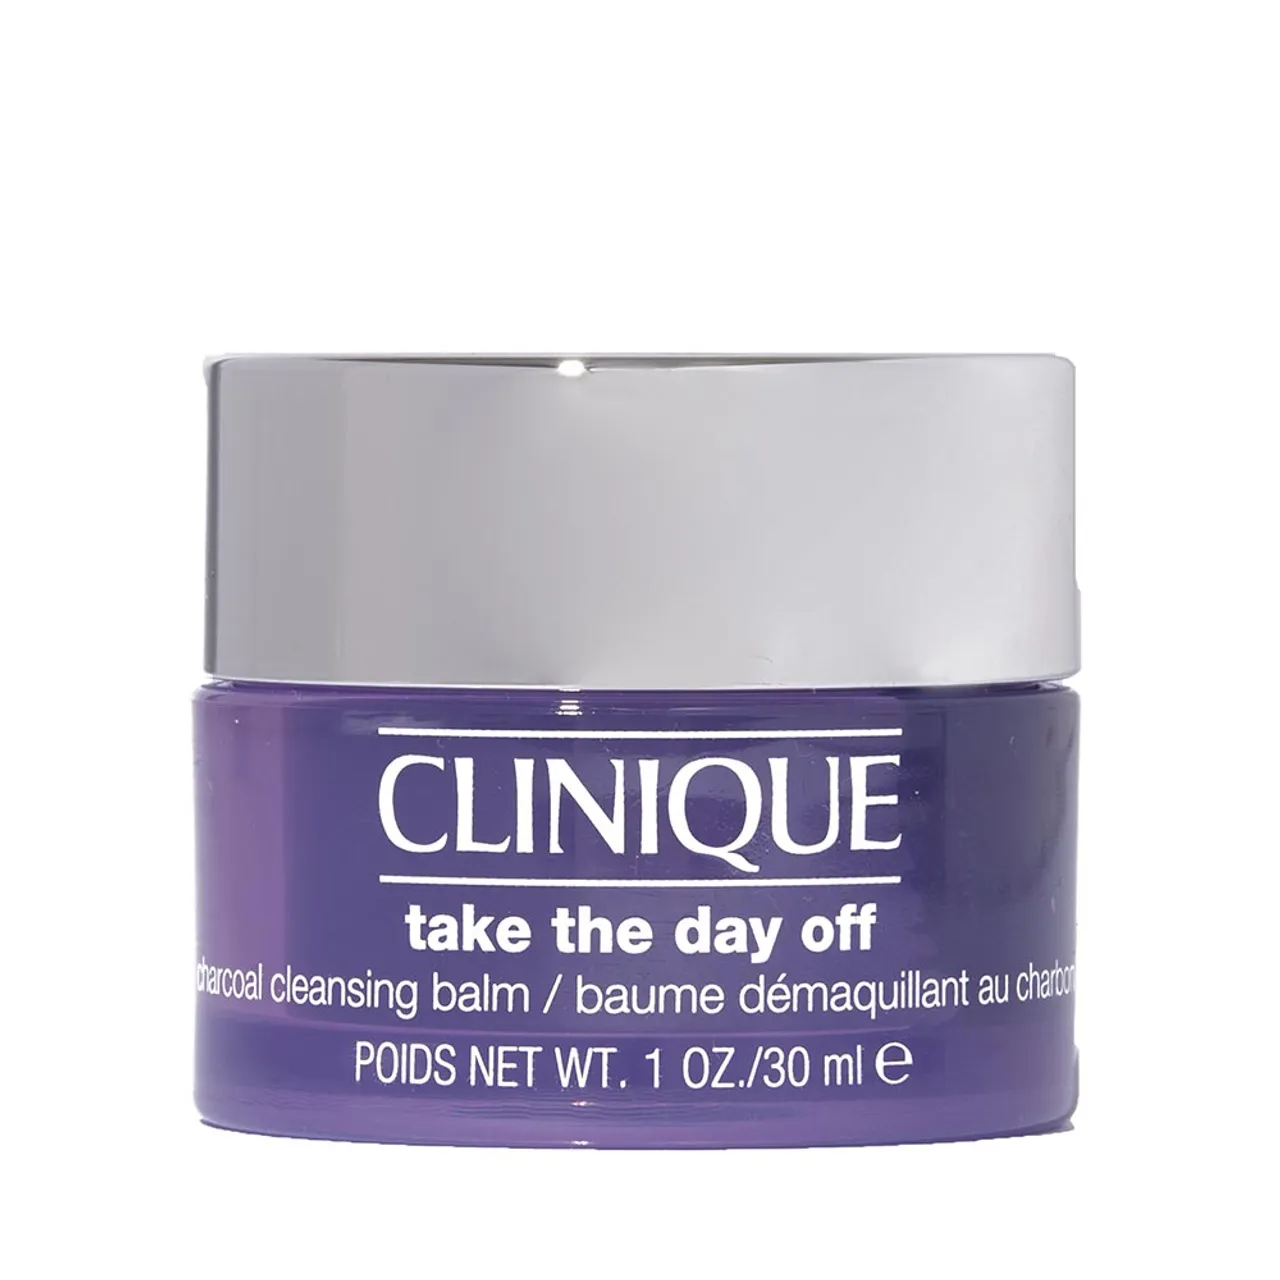 Take The Day Off™ Charcoal Cleansing Balm Take The Day Off™ Charcoal Cleansing Balm